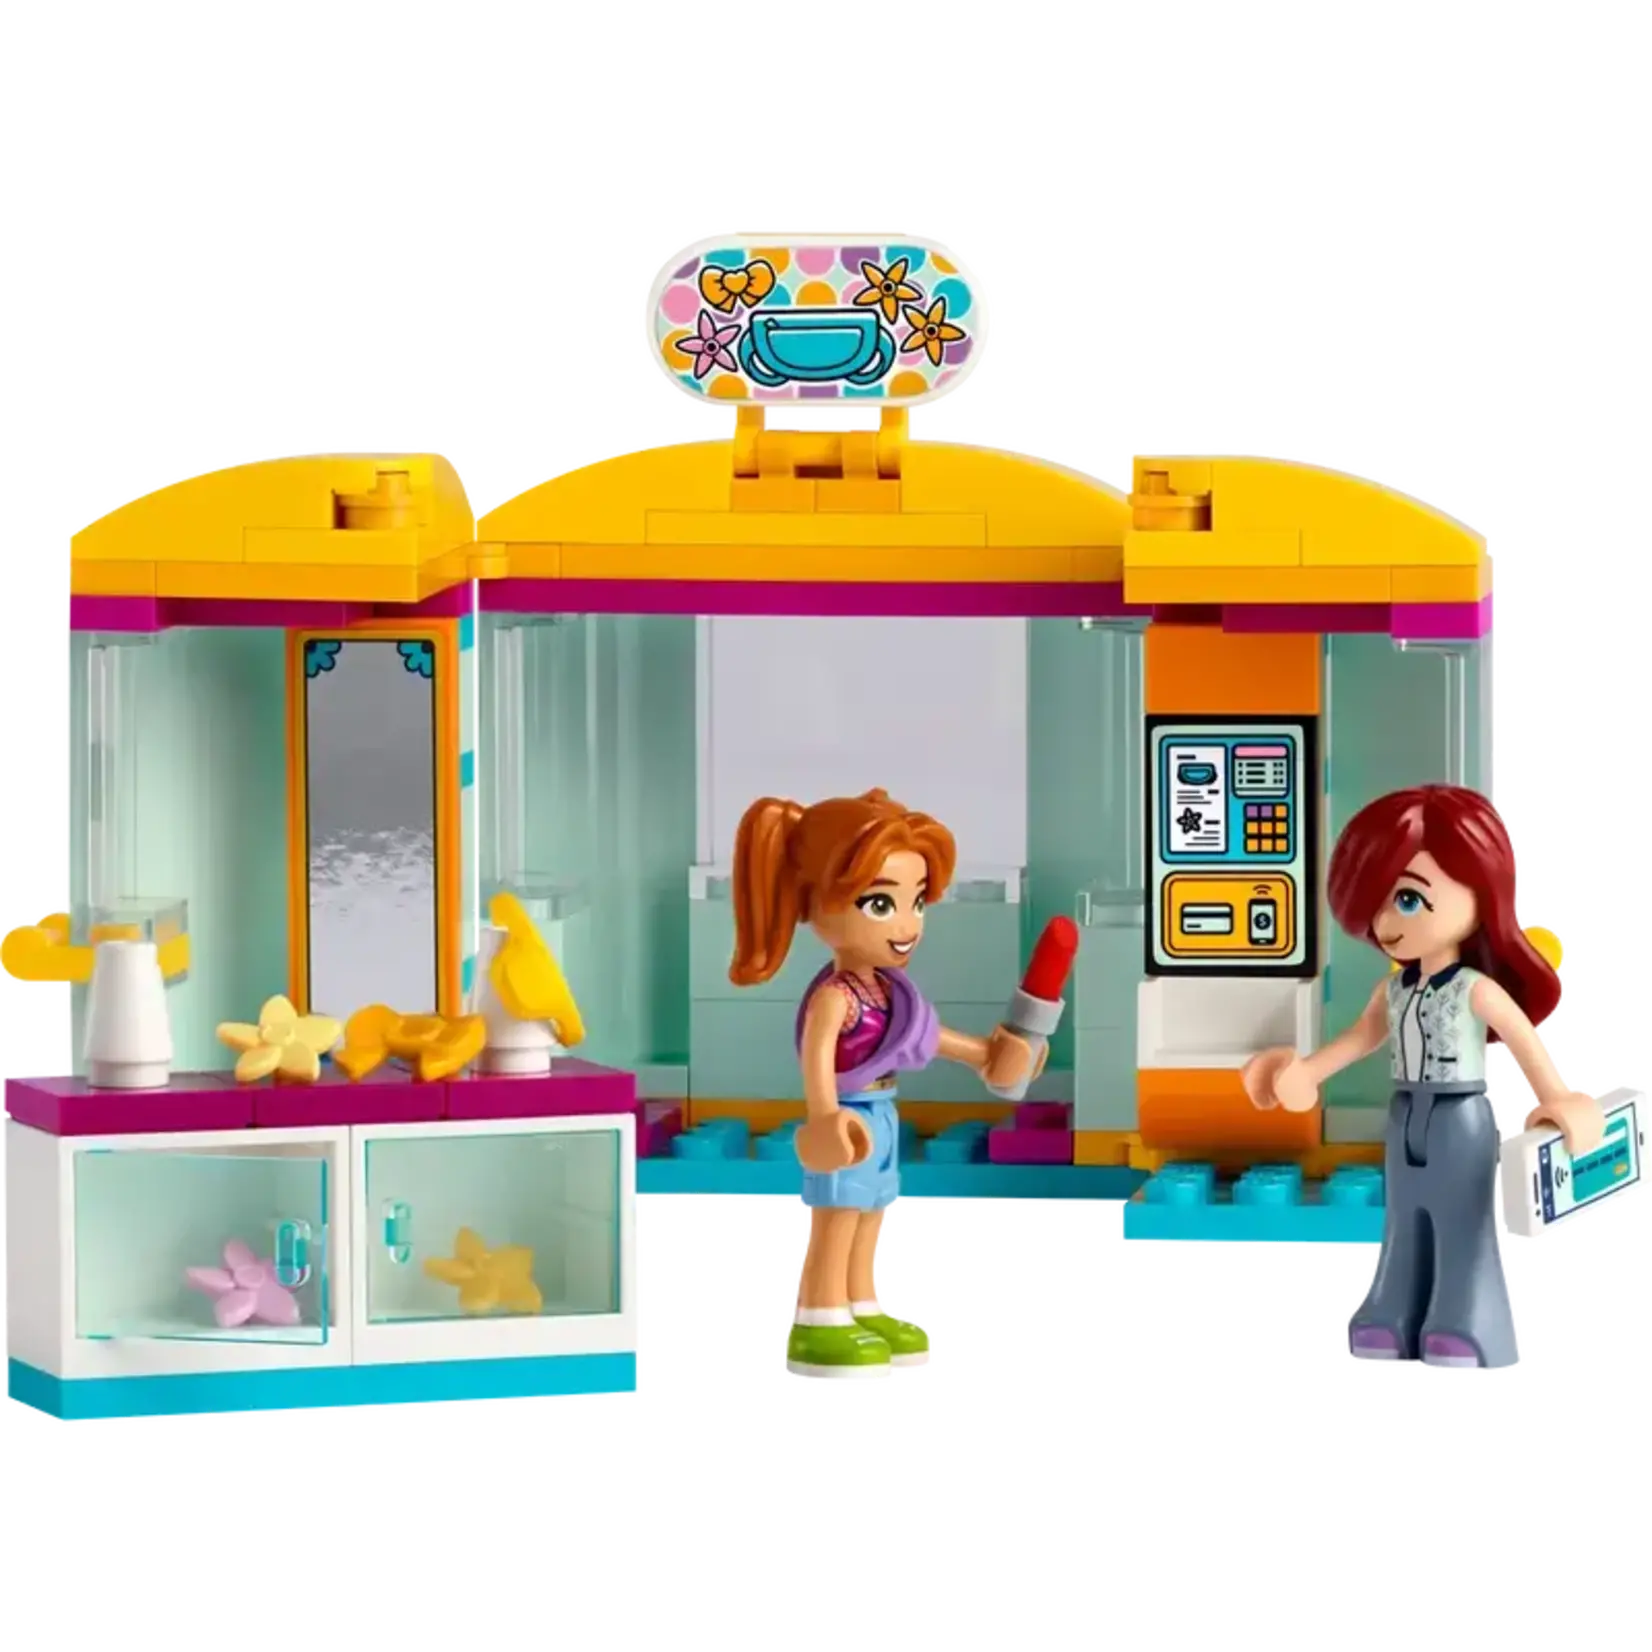 Lego Friends Tiny Accessories Store